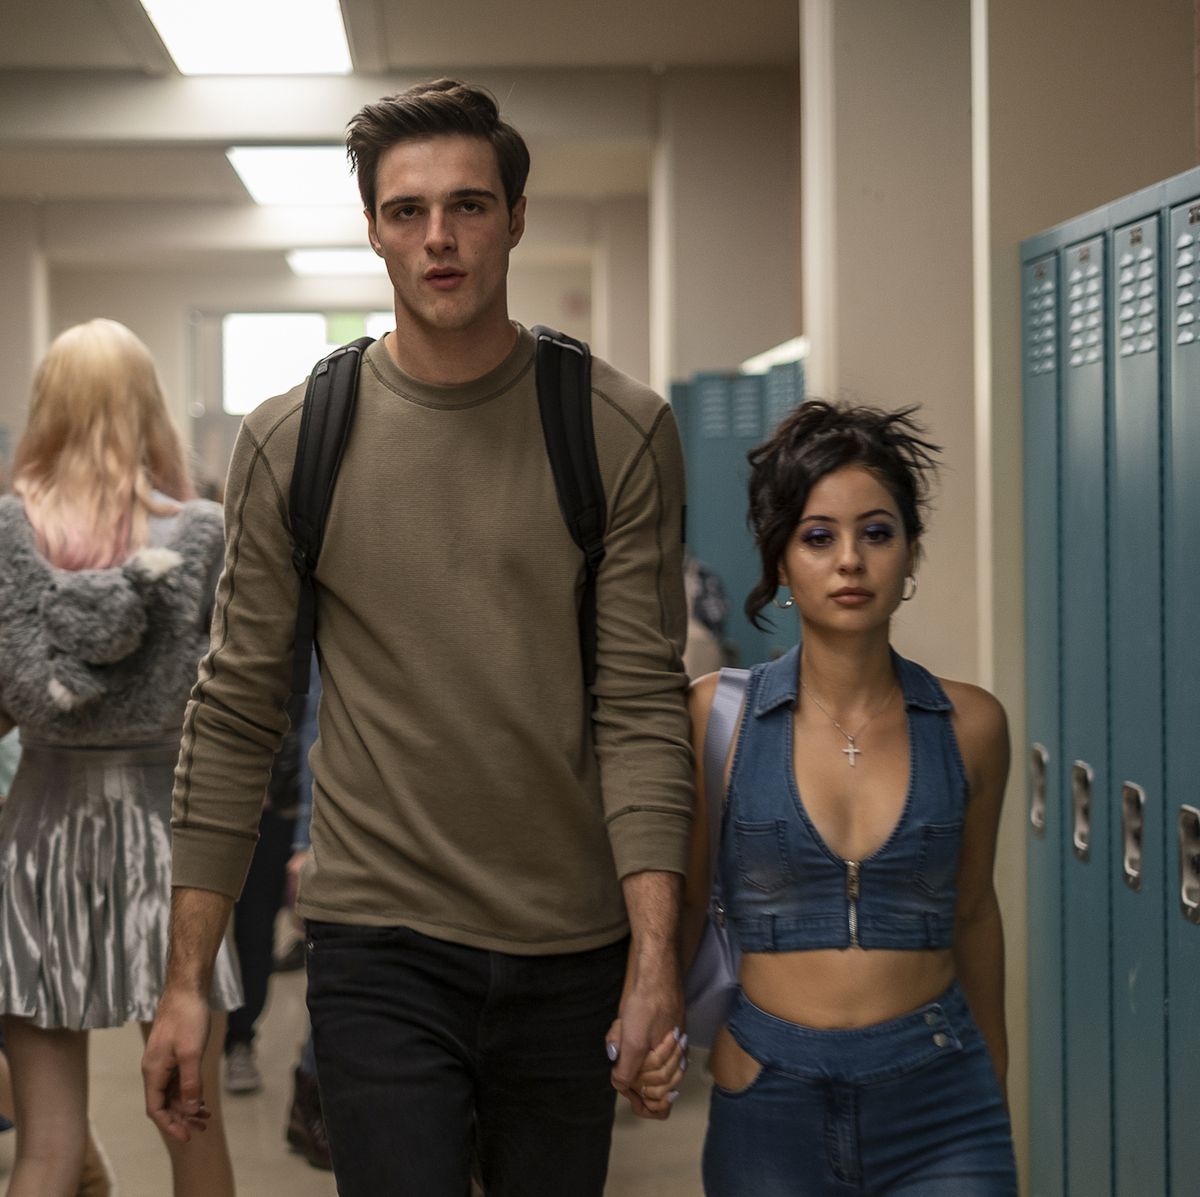 Real Tall Girl Sex - Euphoria's Maddy and Nate Height Difference - Jacob Elordi Height